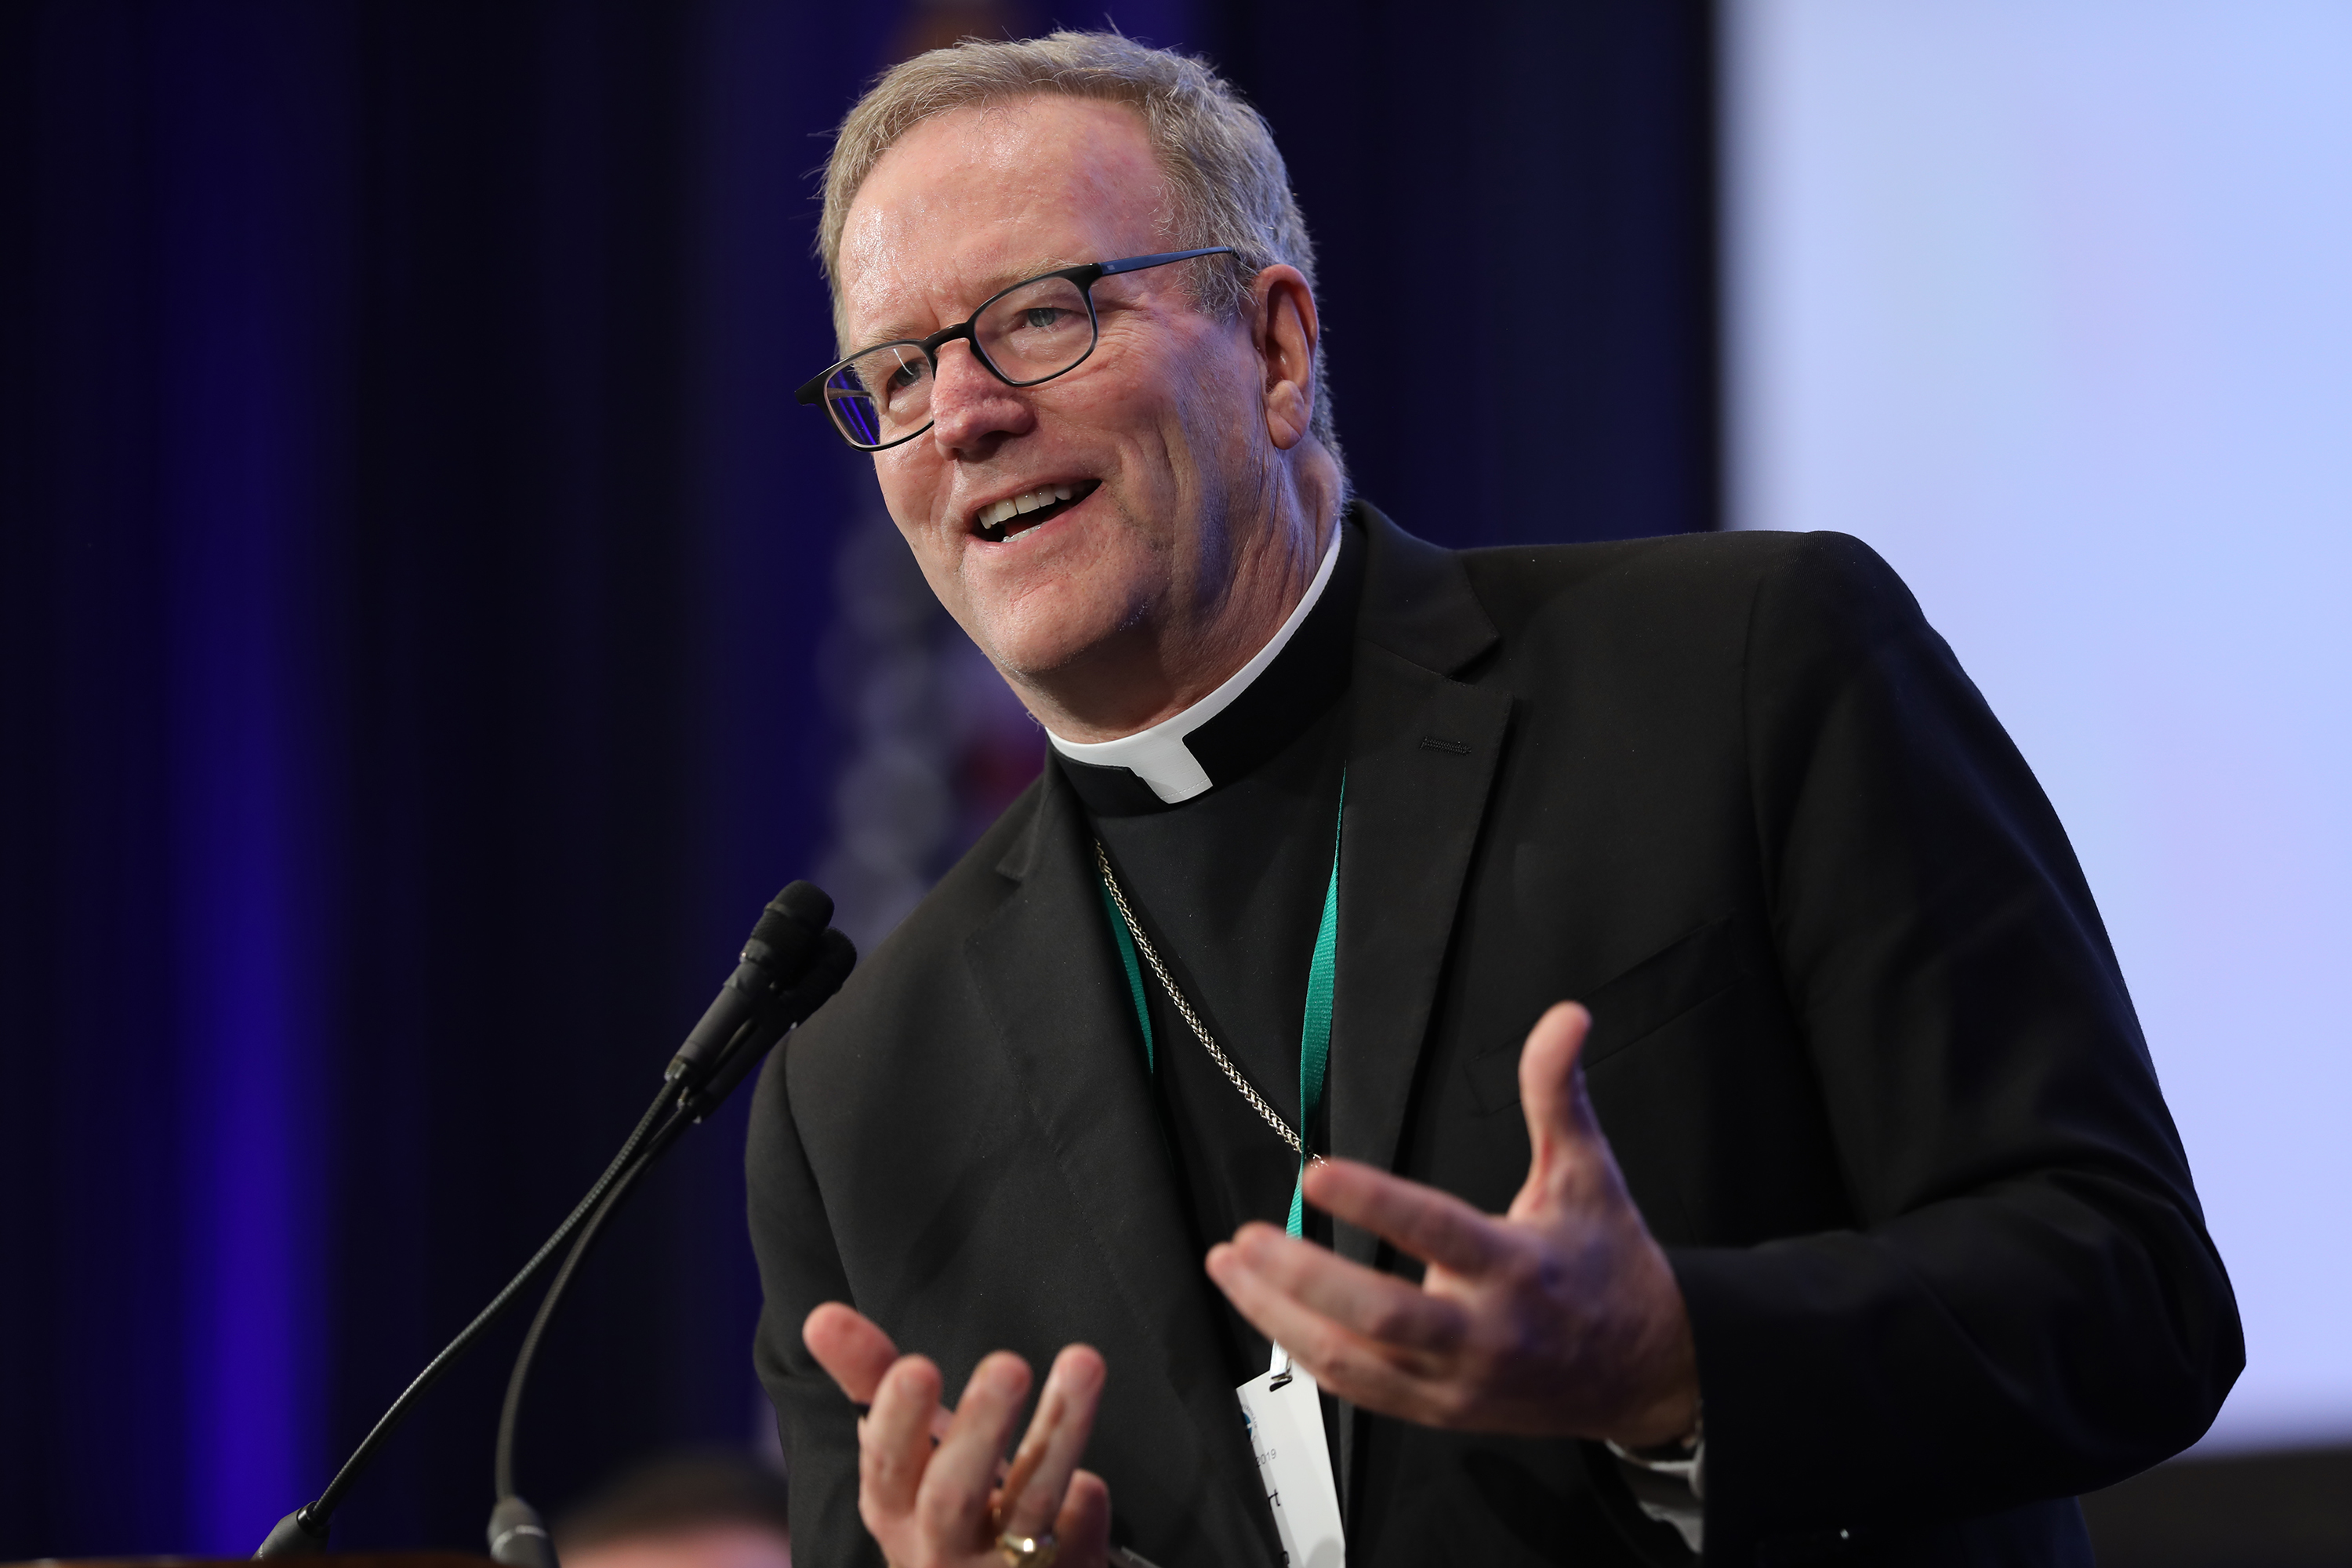 Los Angeles Auxiliary Bishop Robert E. Barron spoke during the fall general assembly of the U.S. Conference of Catholic Bishops in Baltimore Nov. 11, 2019.